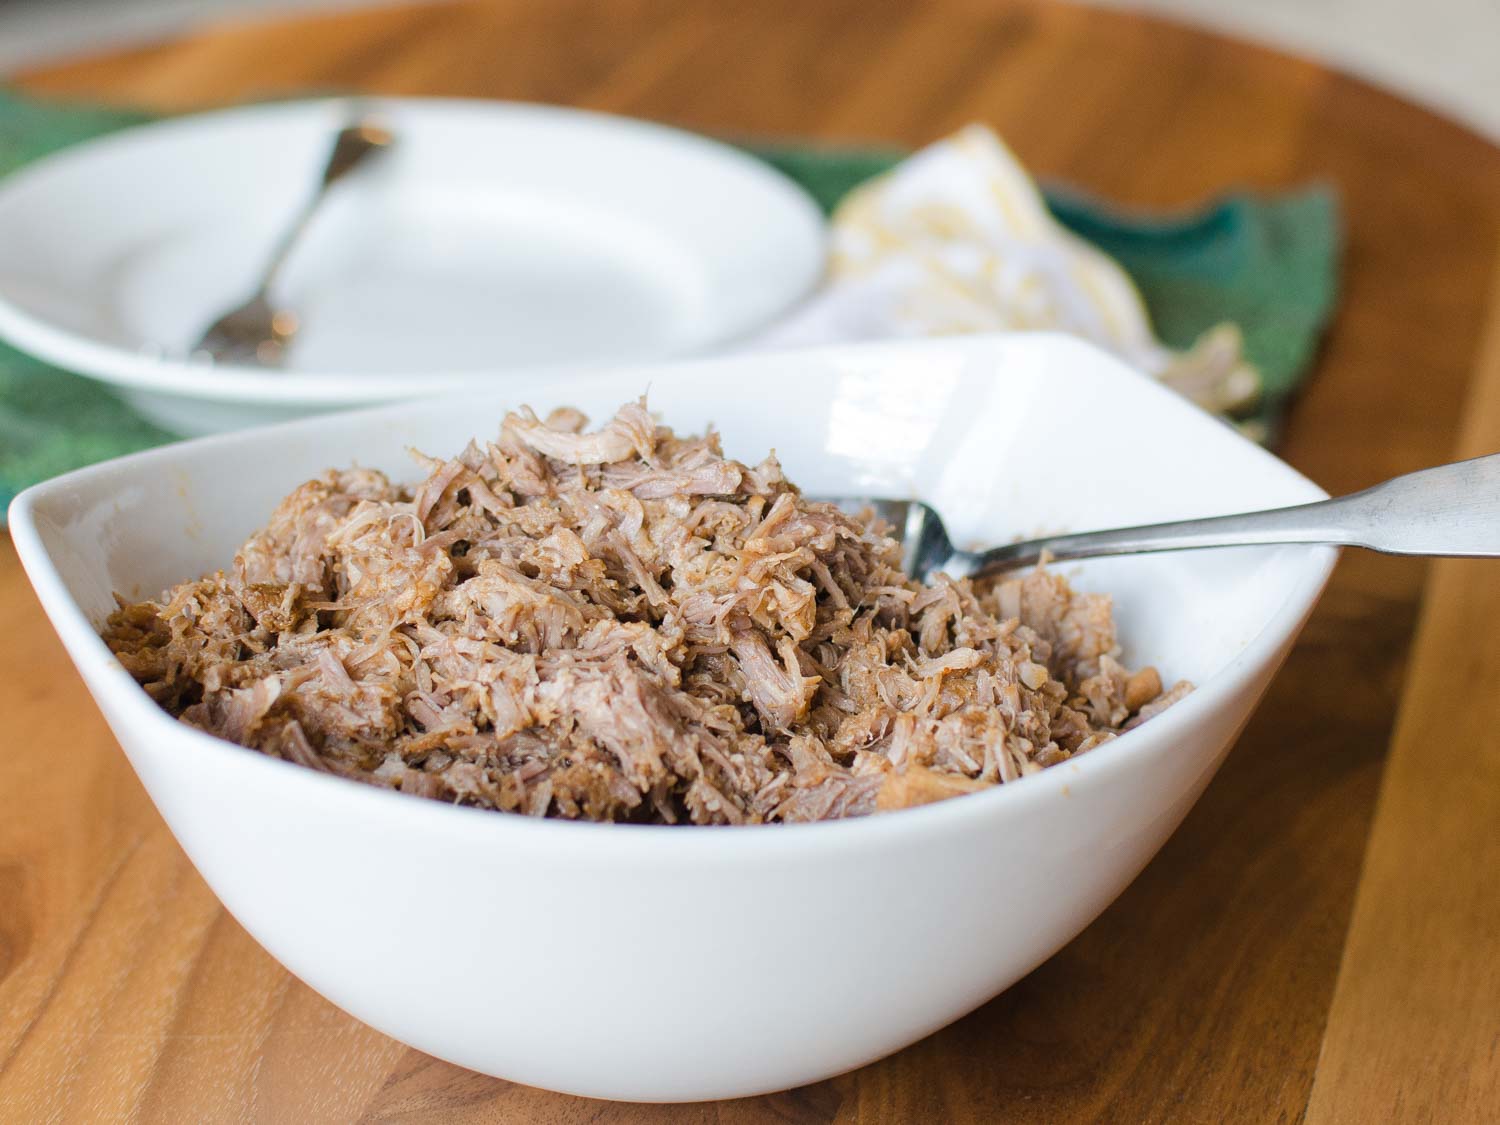 How to Make Pulled Pork without Barbecue Sauce.  Pressure Cooker Pulled Pork is ready in a fraction of the time!